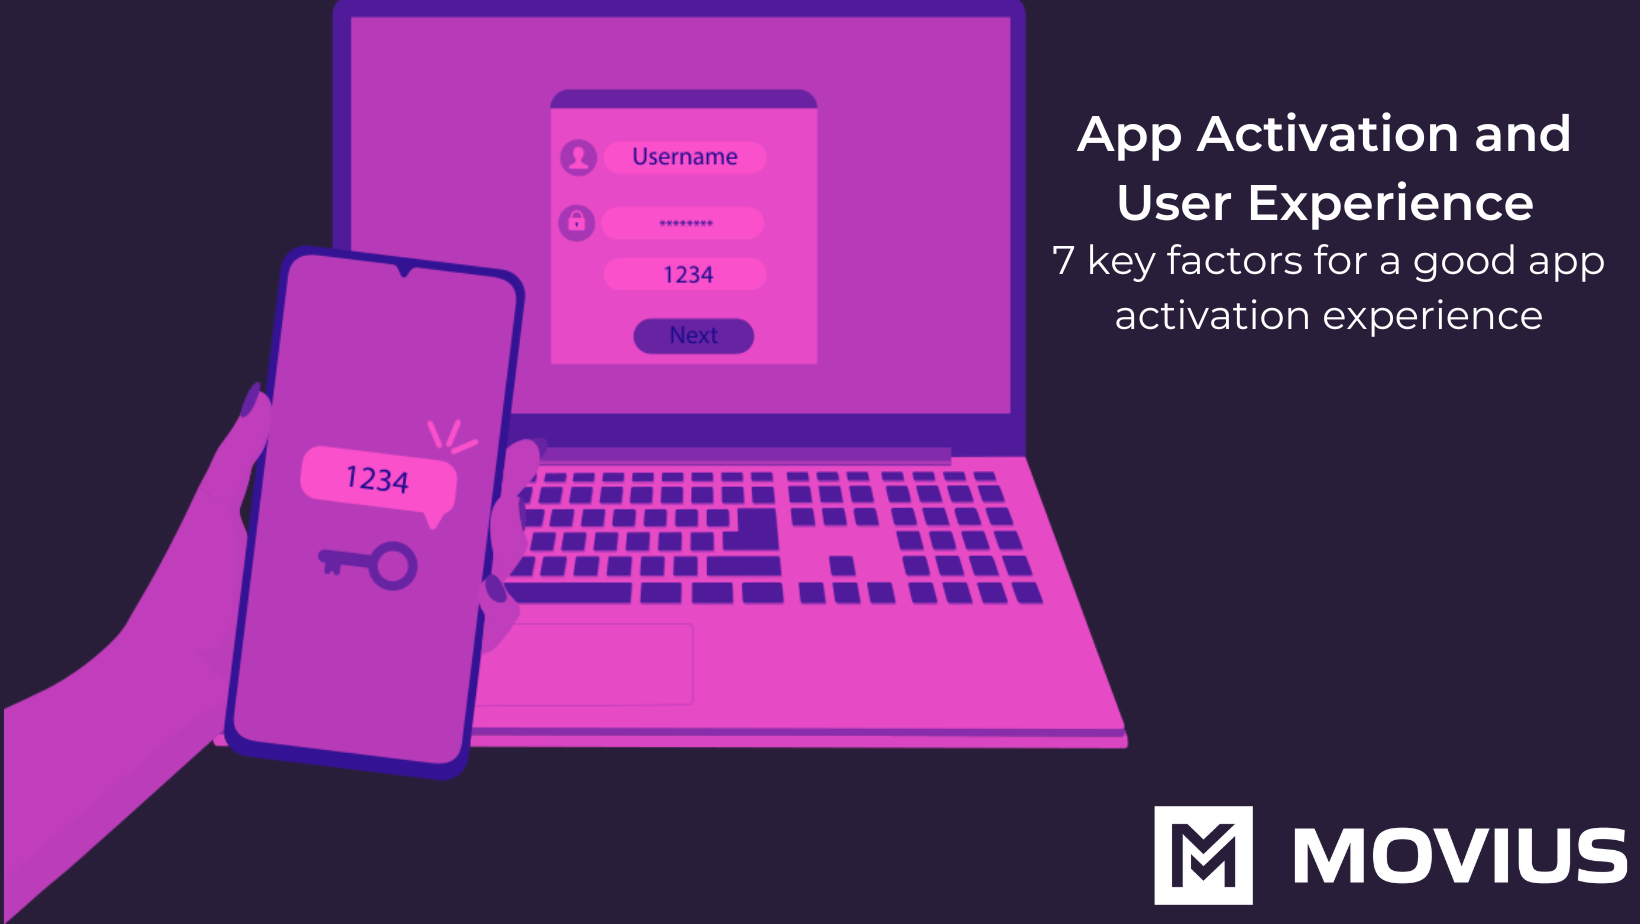 App Activation and User Experience 7 Key Factors for a good app activation experience